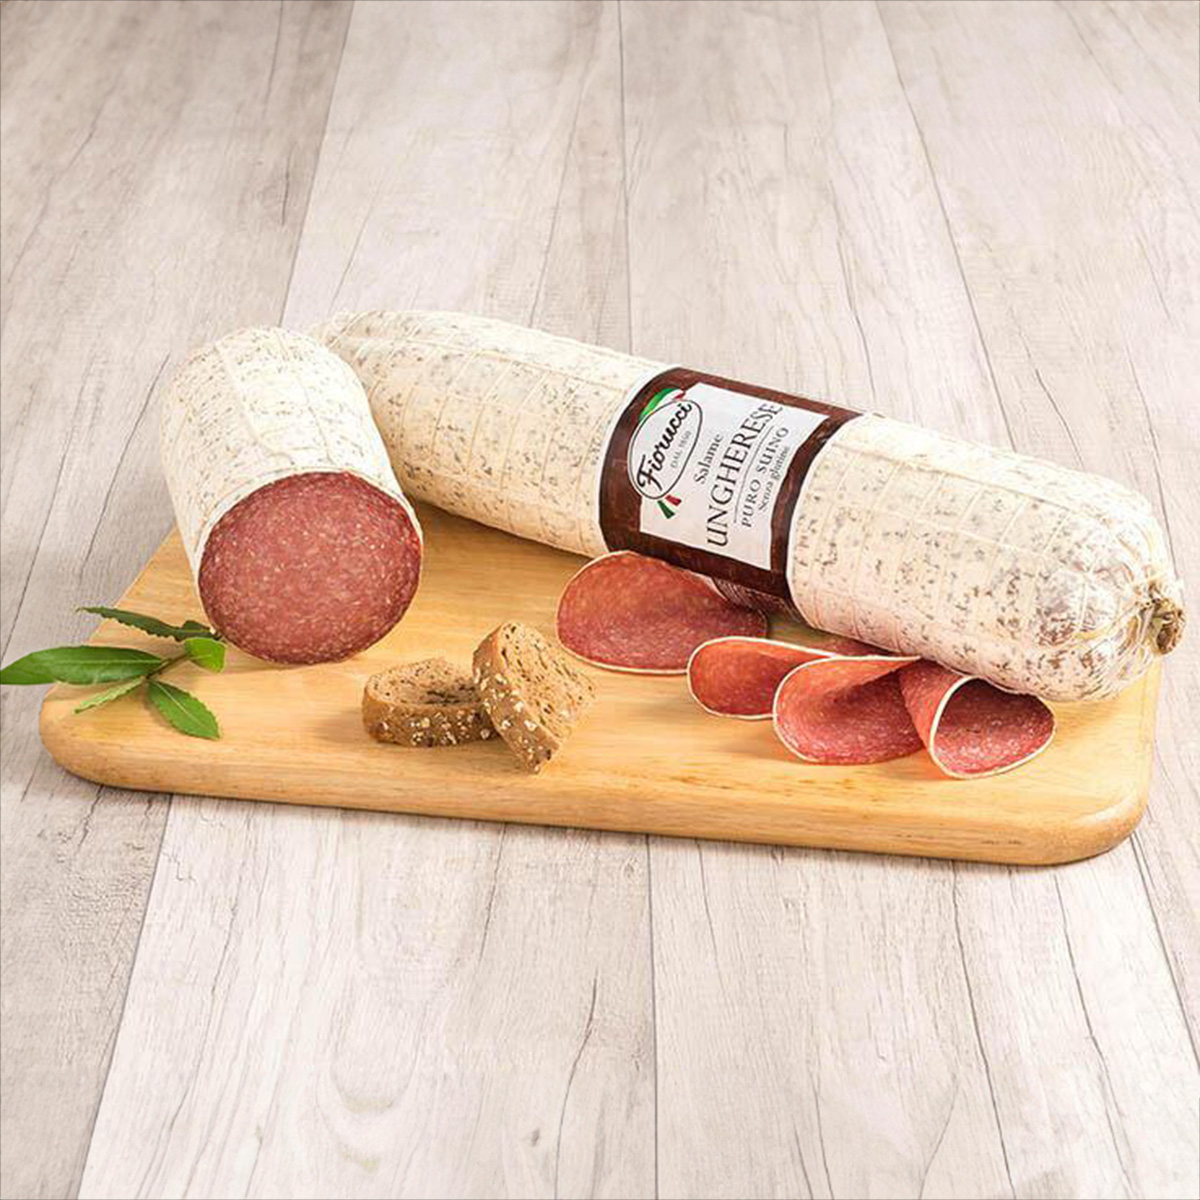 1/2 SALAME UNGHERESE 6 x 1,5kg